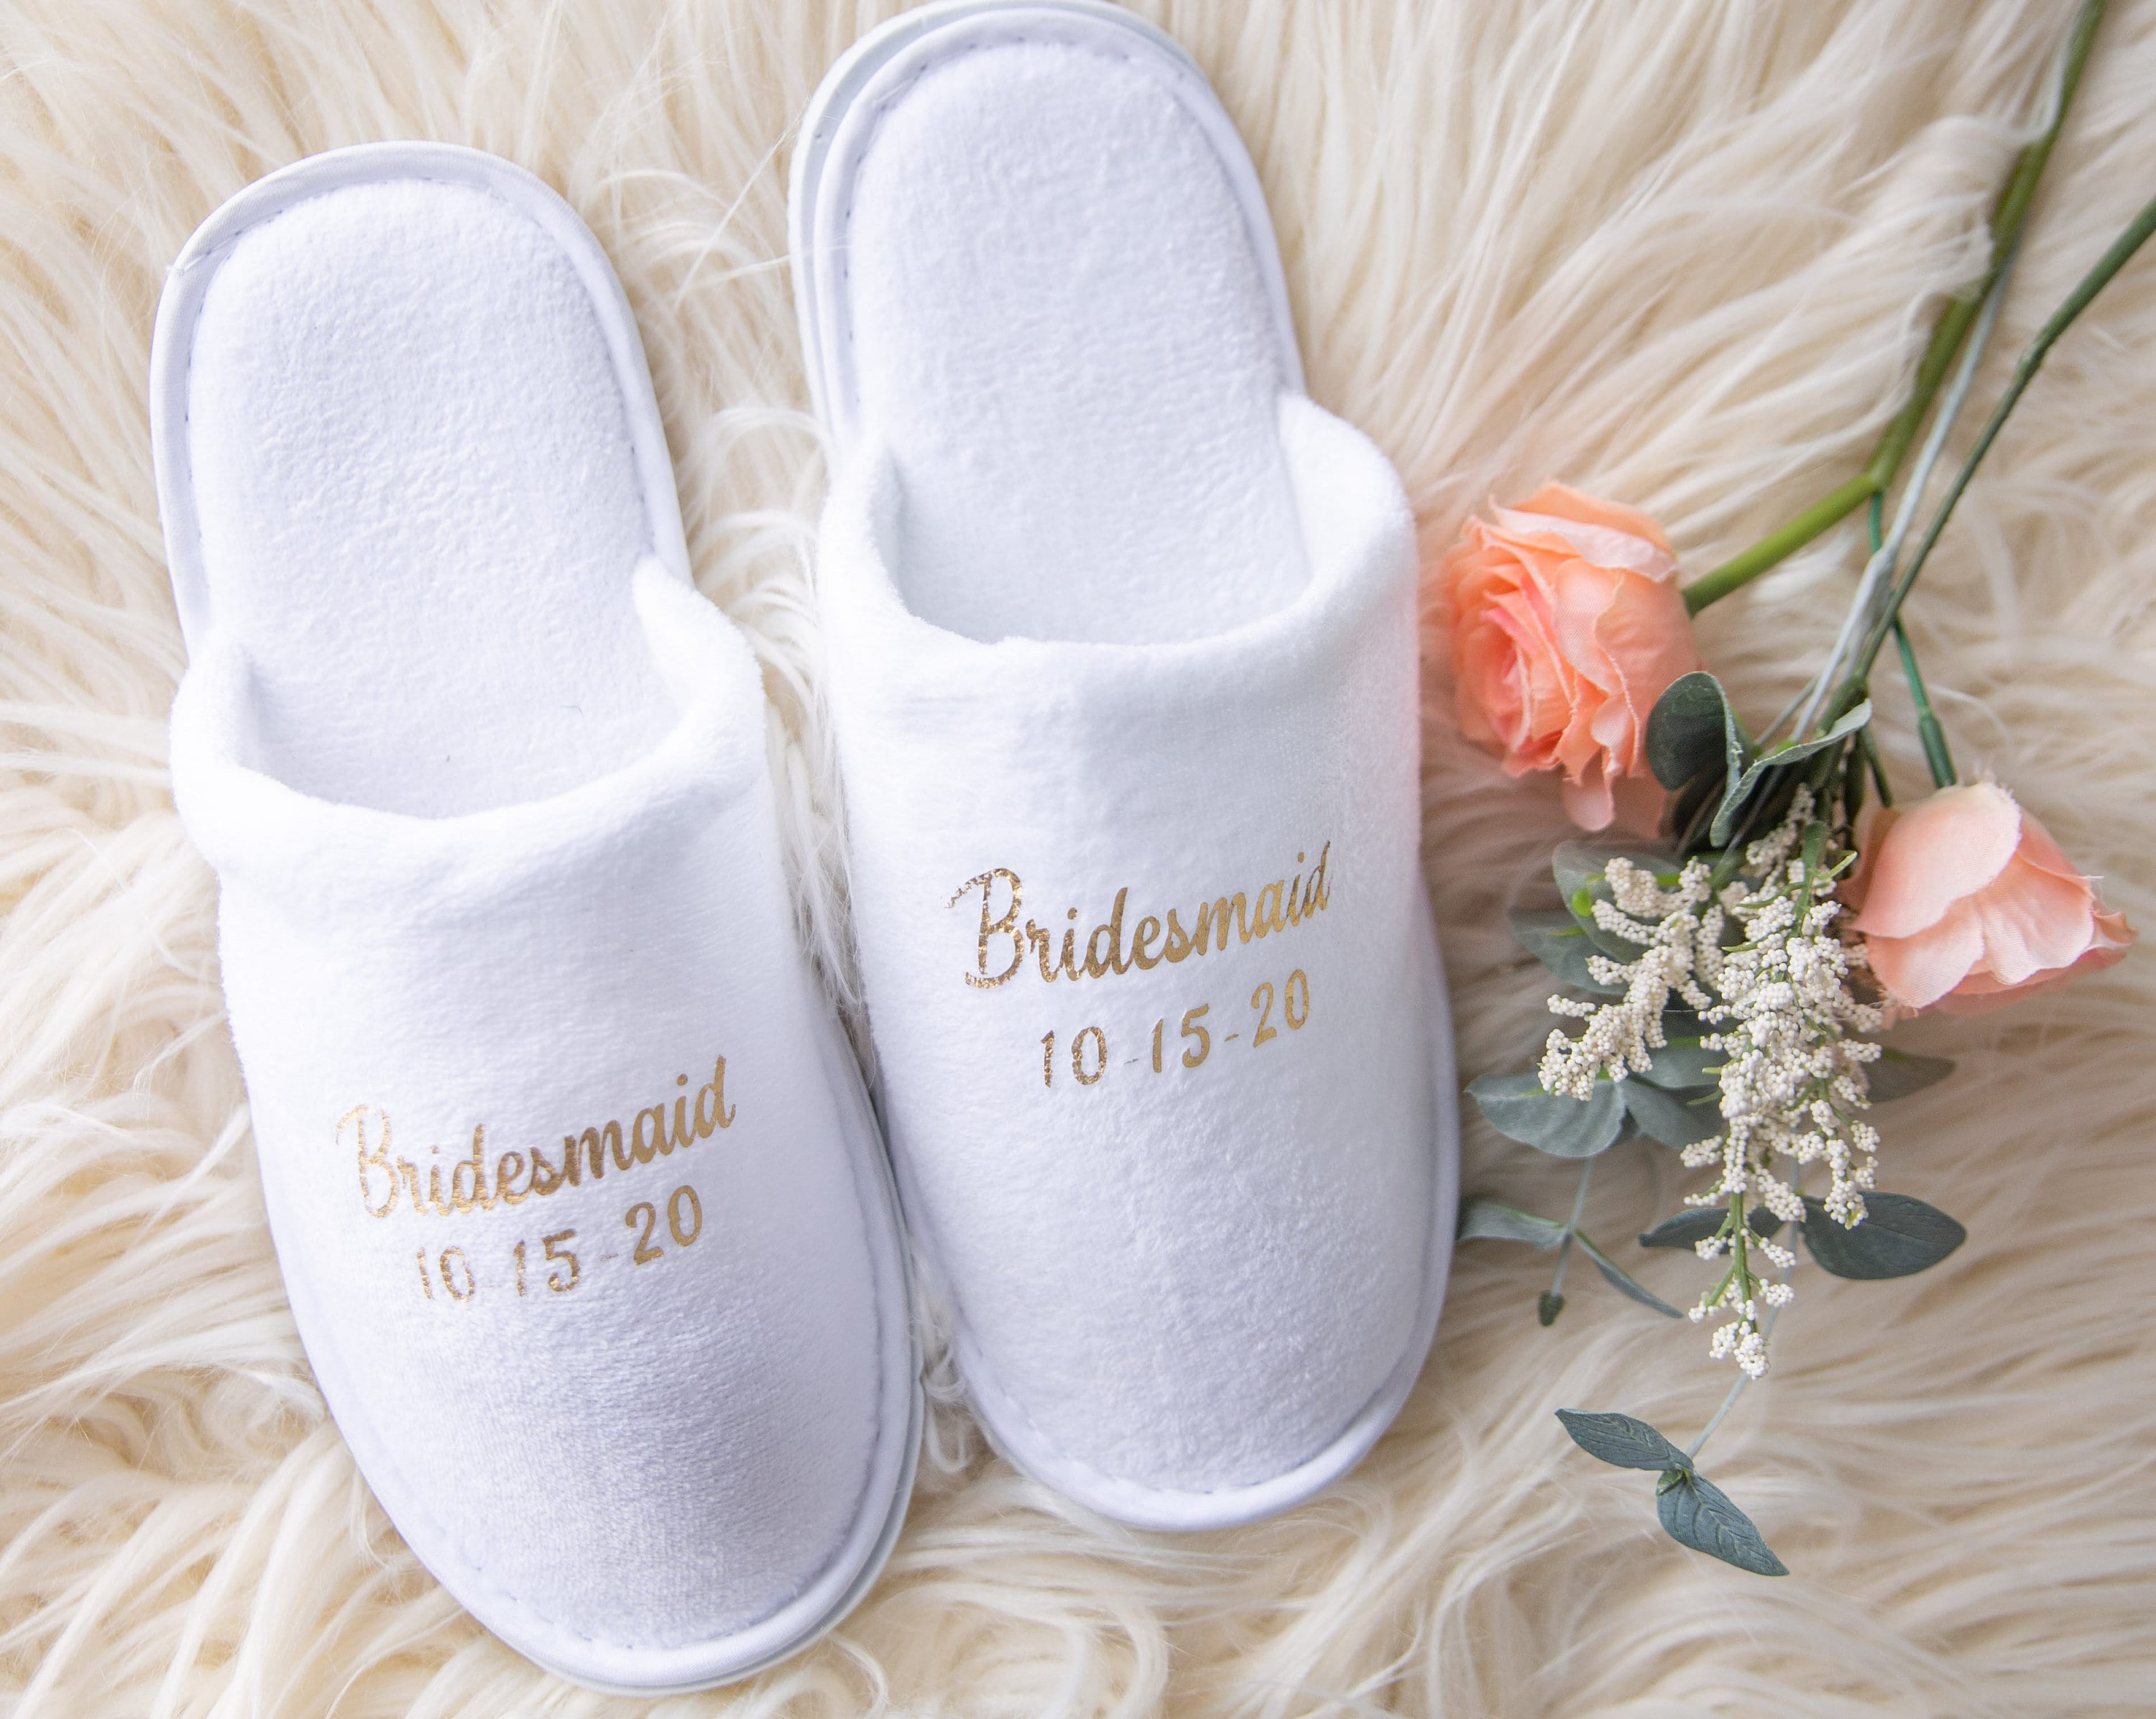 Bride Slippers Bridesmaid Slippers Babe Bachelorette Party Slippers Cute Bridesmaid Gifts Bride Gift Ideas Wedding Getting Ready (EB3394WD)